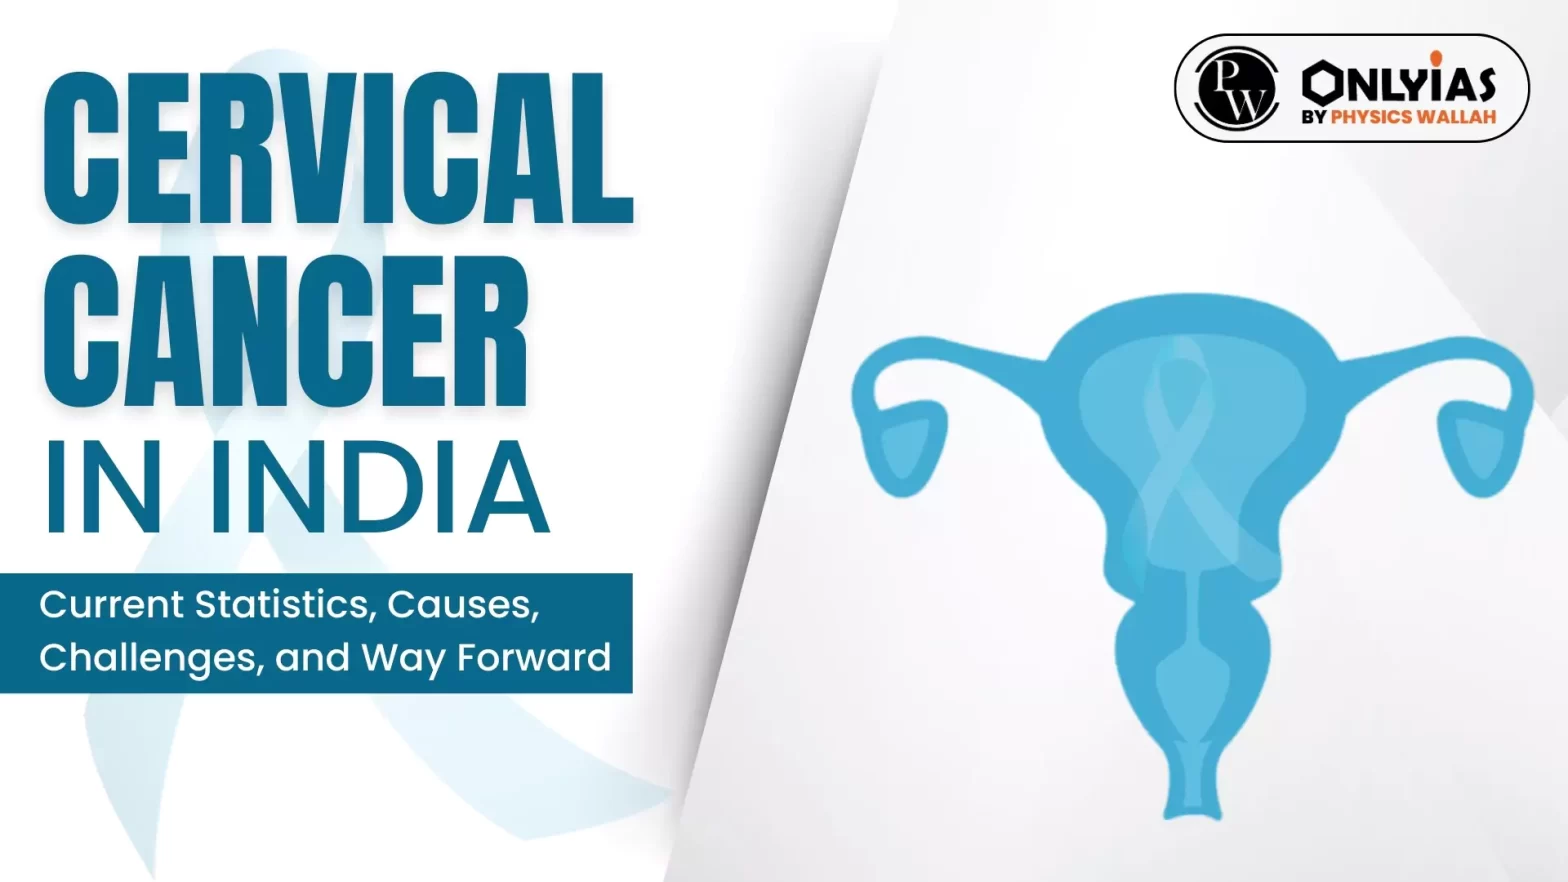 Cervical Cancer in India: Current Statistics, Causes, Challenges, and Way Forward